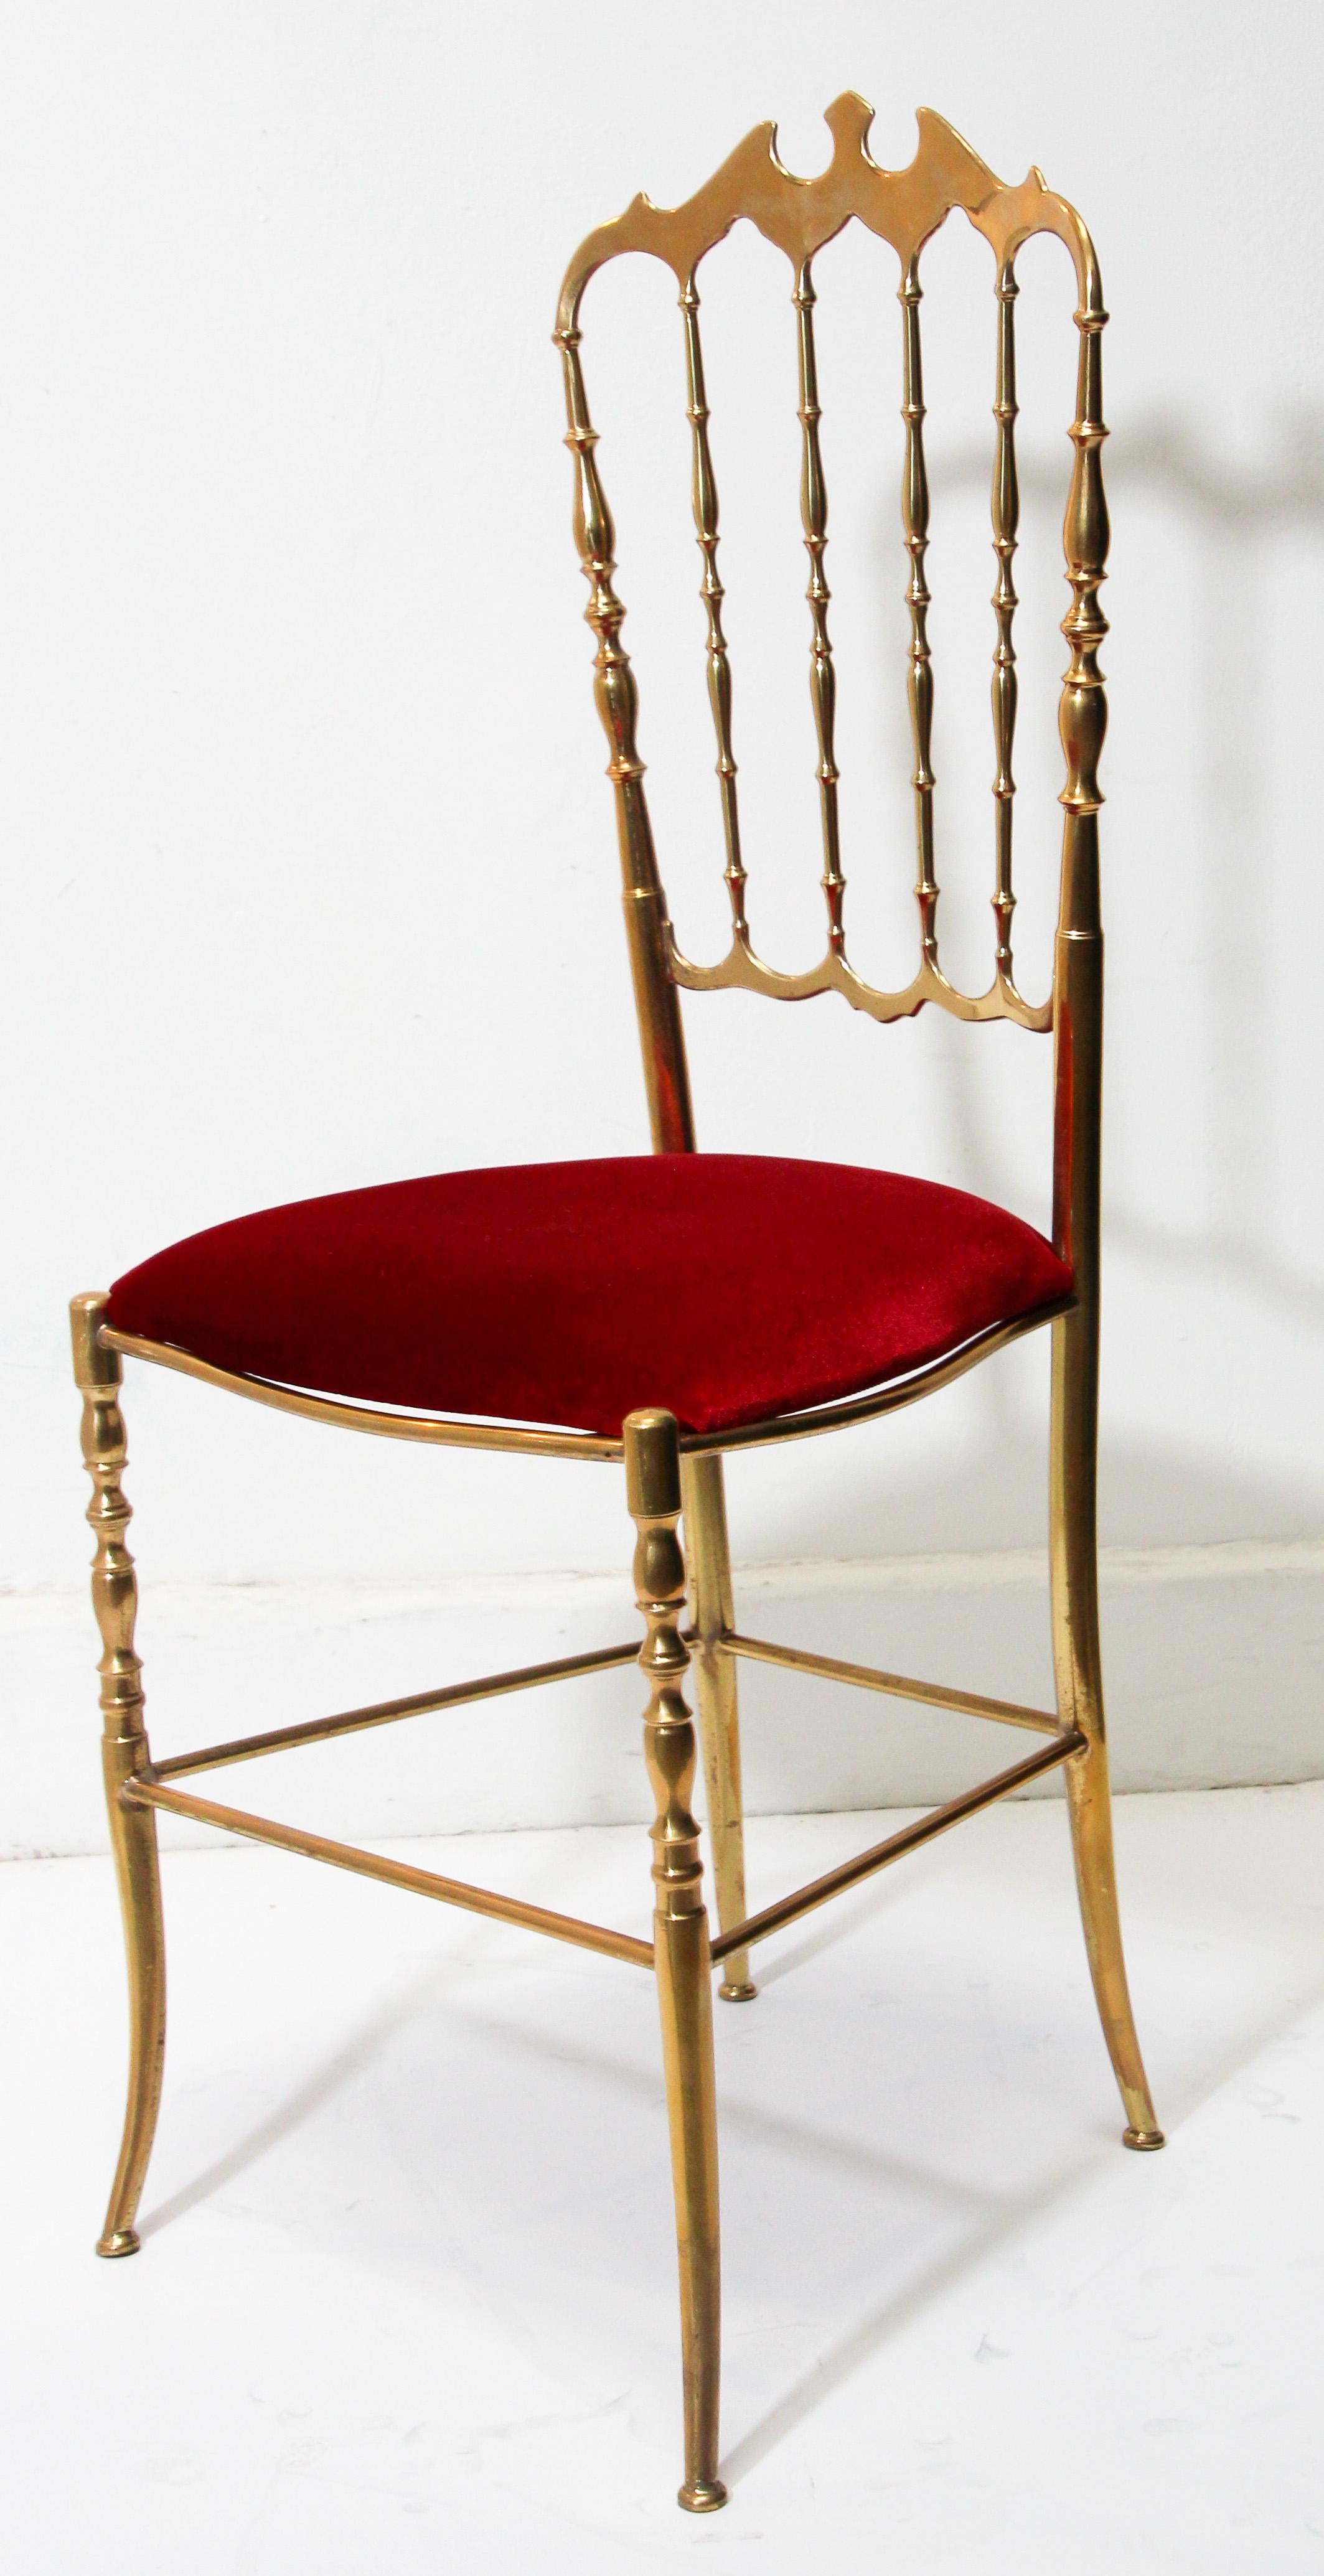 Polished Brass Chiavari Chair with Red Velvet, Italy, 1960s For Sale 2